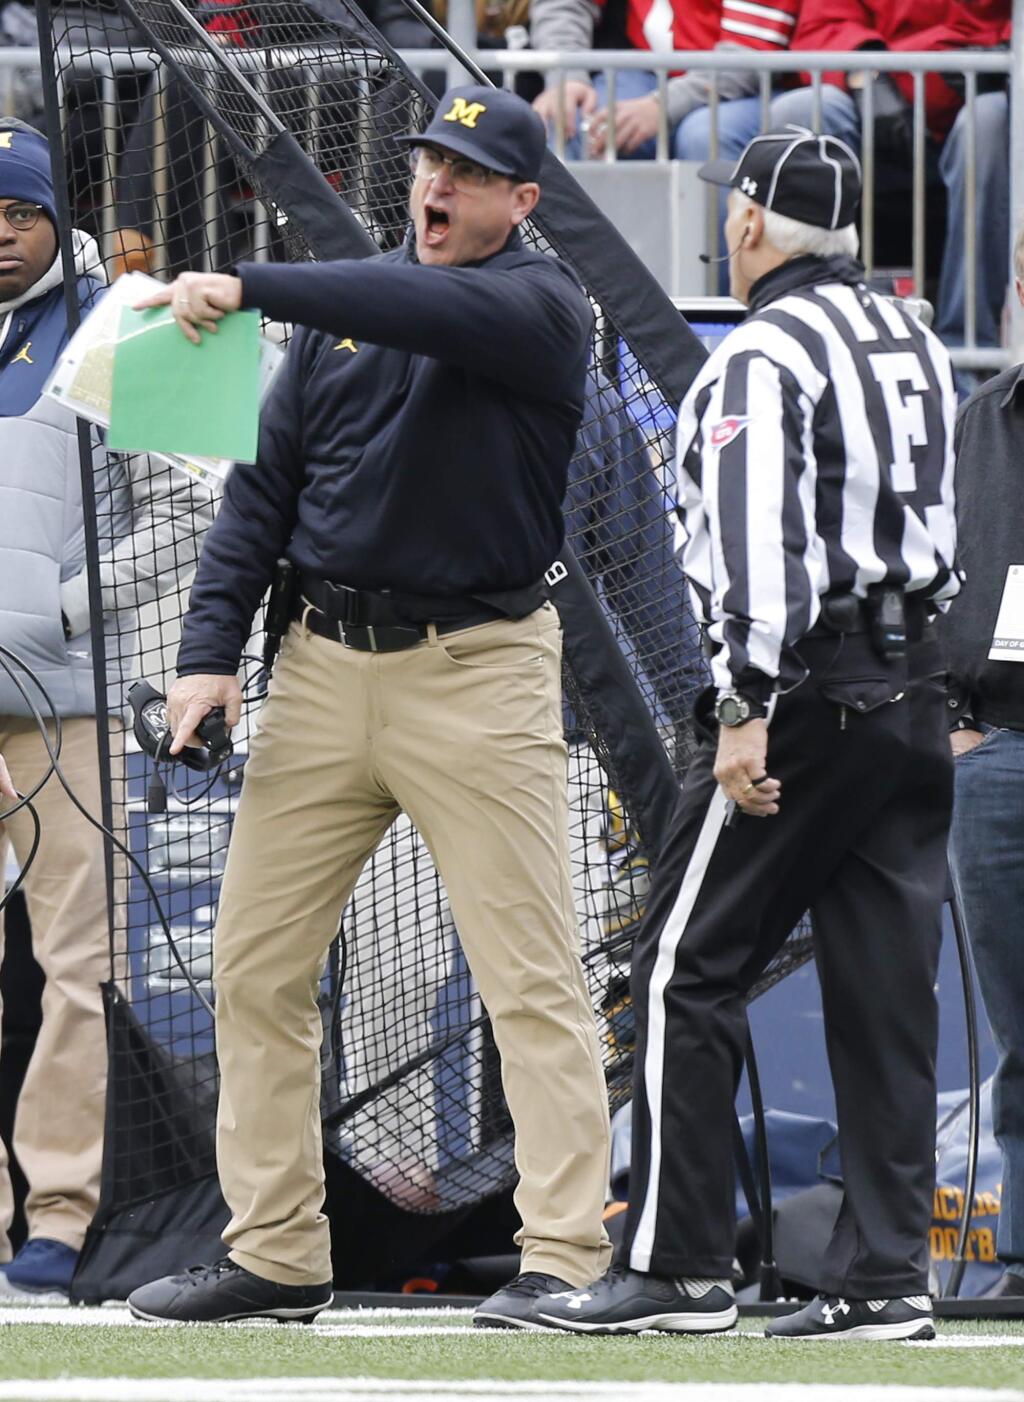 Michigan coach Jim Harbaugh, left, yells at the field judge during the first half of a game against Ohio State, Saturday, Nov. 26 in Columbus, Ohio. Ohio State beat Michigan 30-27 in double overtime. (AP Photo/Jay LaPrete)